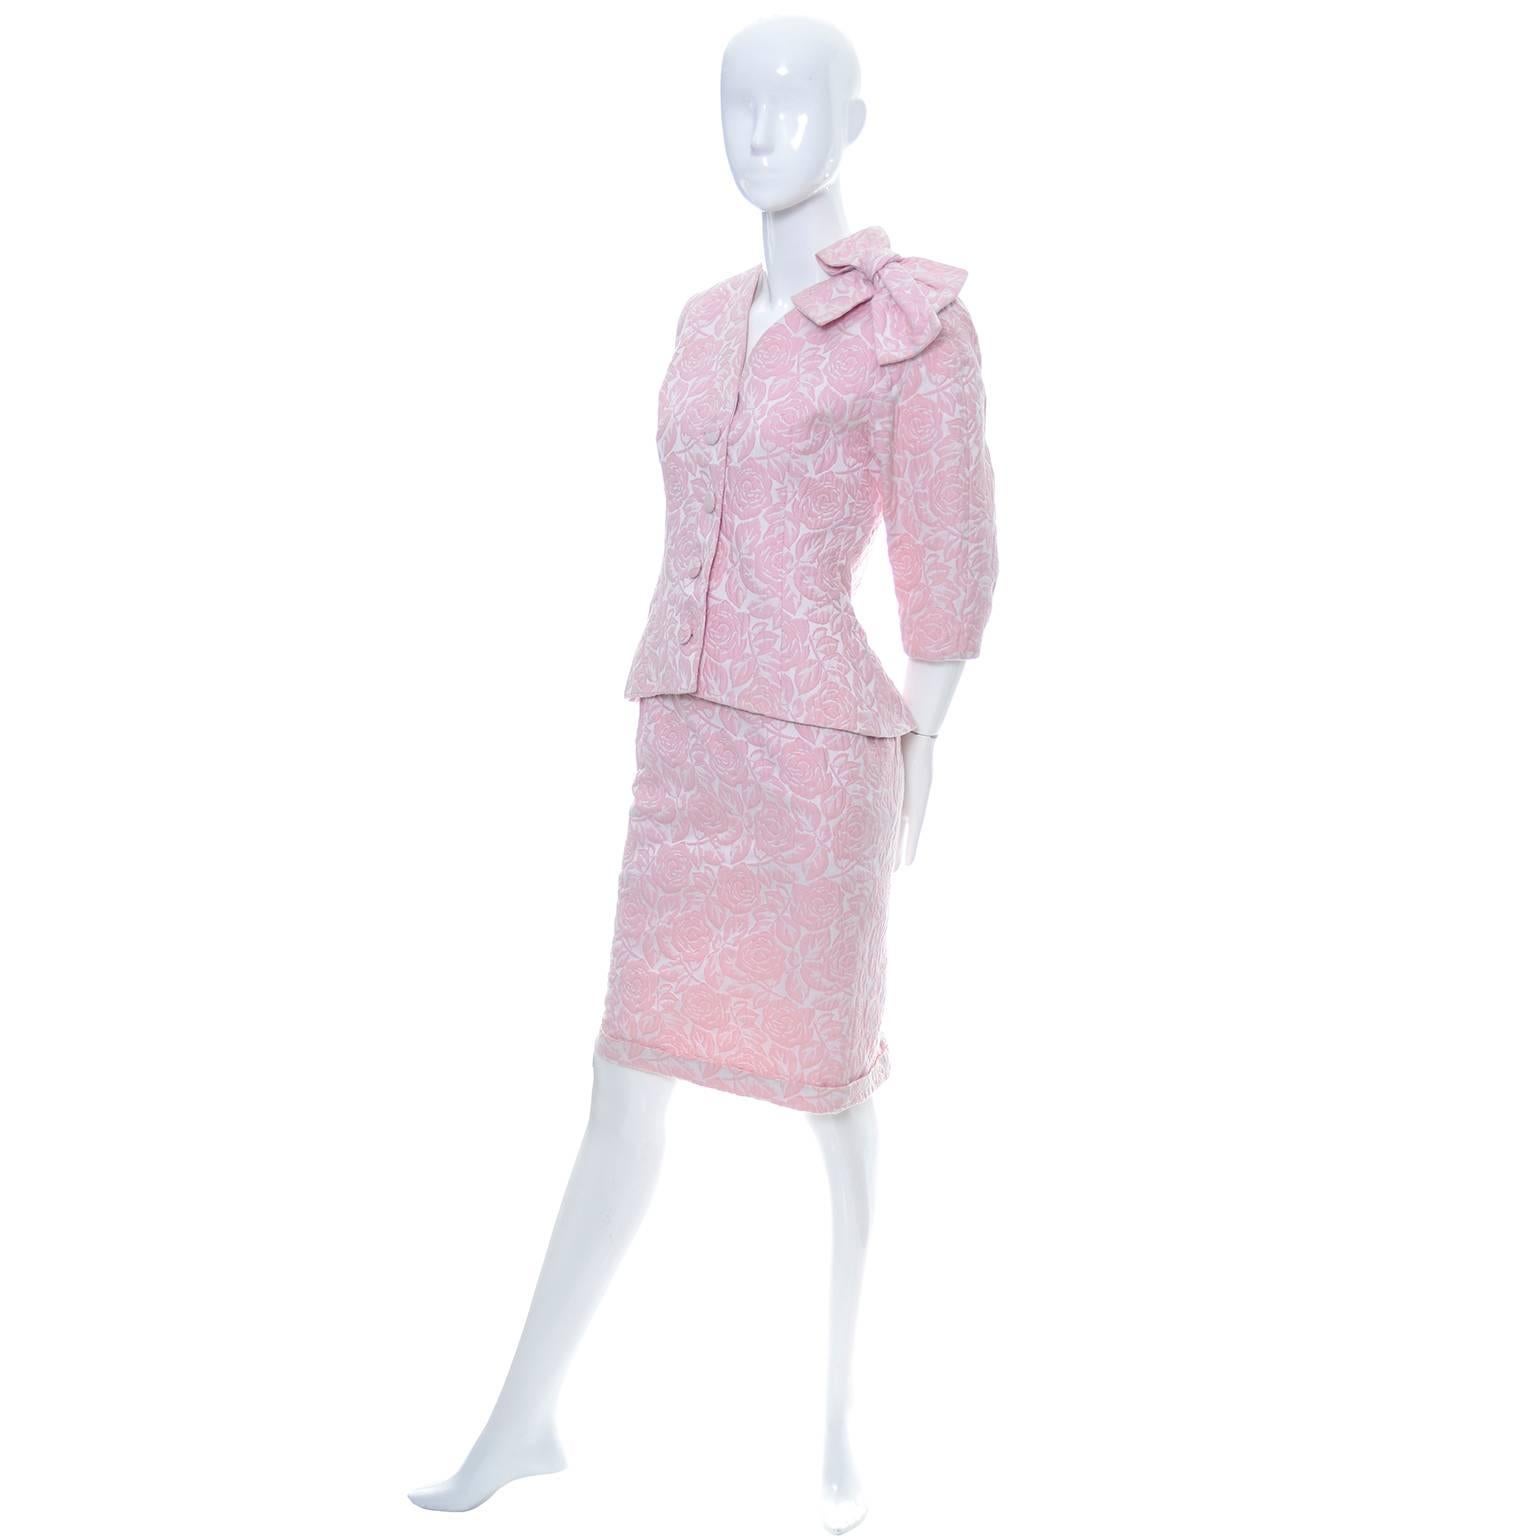 This is a lovely pink floral jacquard skirt suit from designer Guy Laroche. This suit belonged to an East coast socialite who had quite a bit of Guy Laroche in her extensive designer wardrobe.  This suit is lined and has the Guy Laroche Boutique